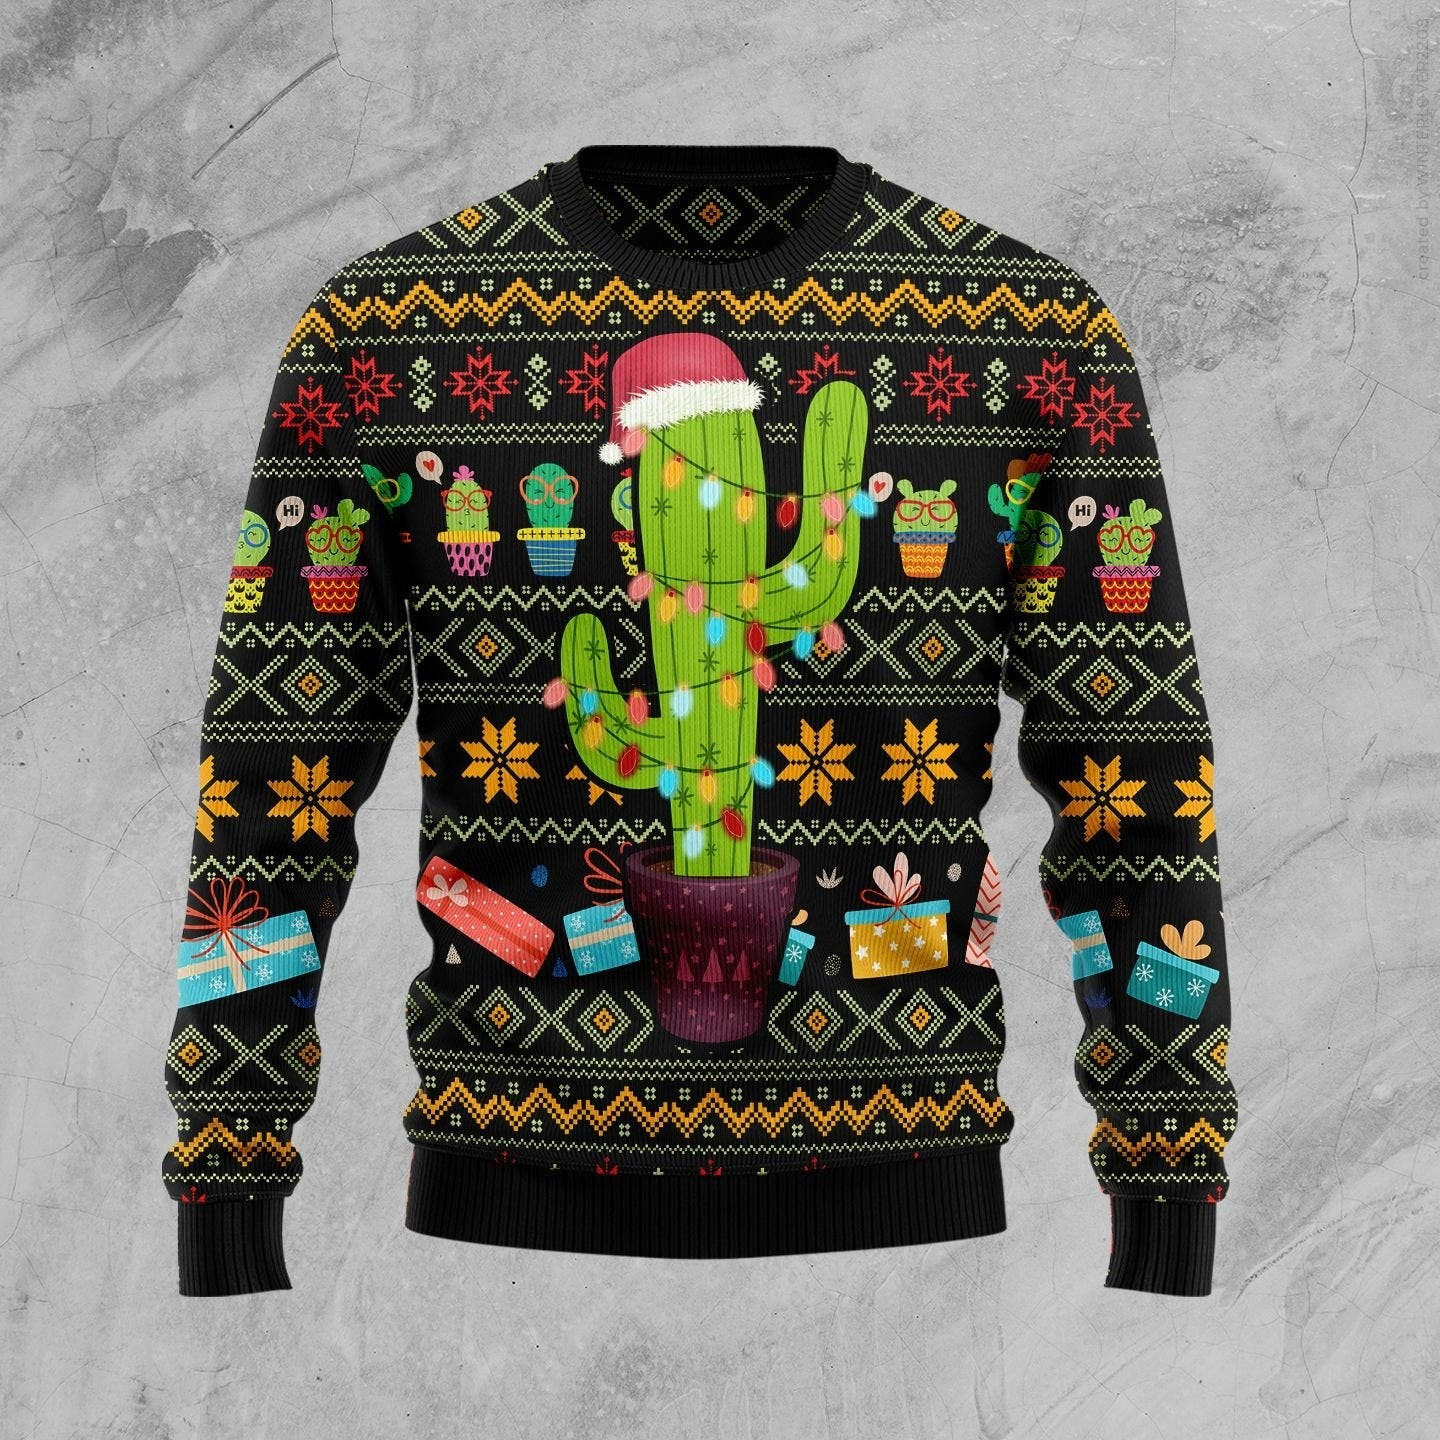 Cactus Xmas Ugly Christmas Sweater Ugly Sweater For Men Women, Holiday Sweater